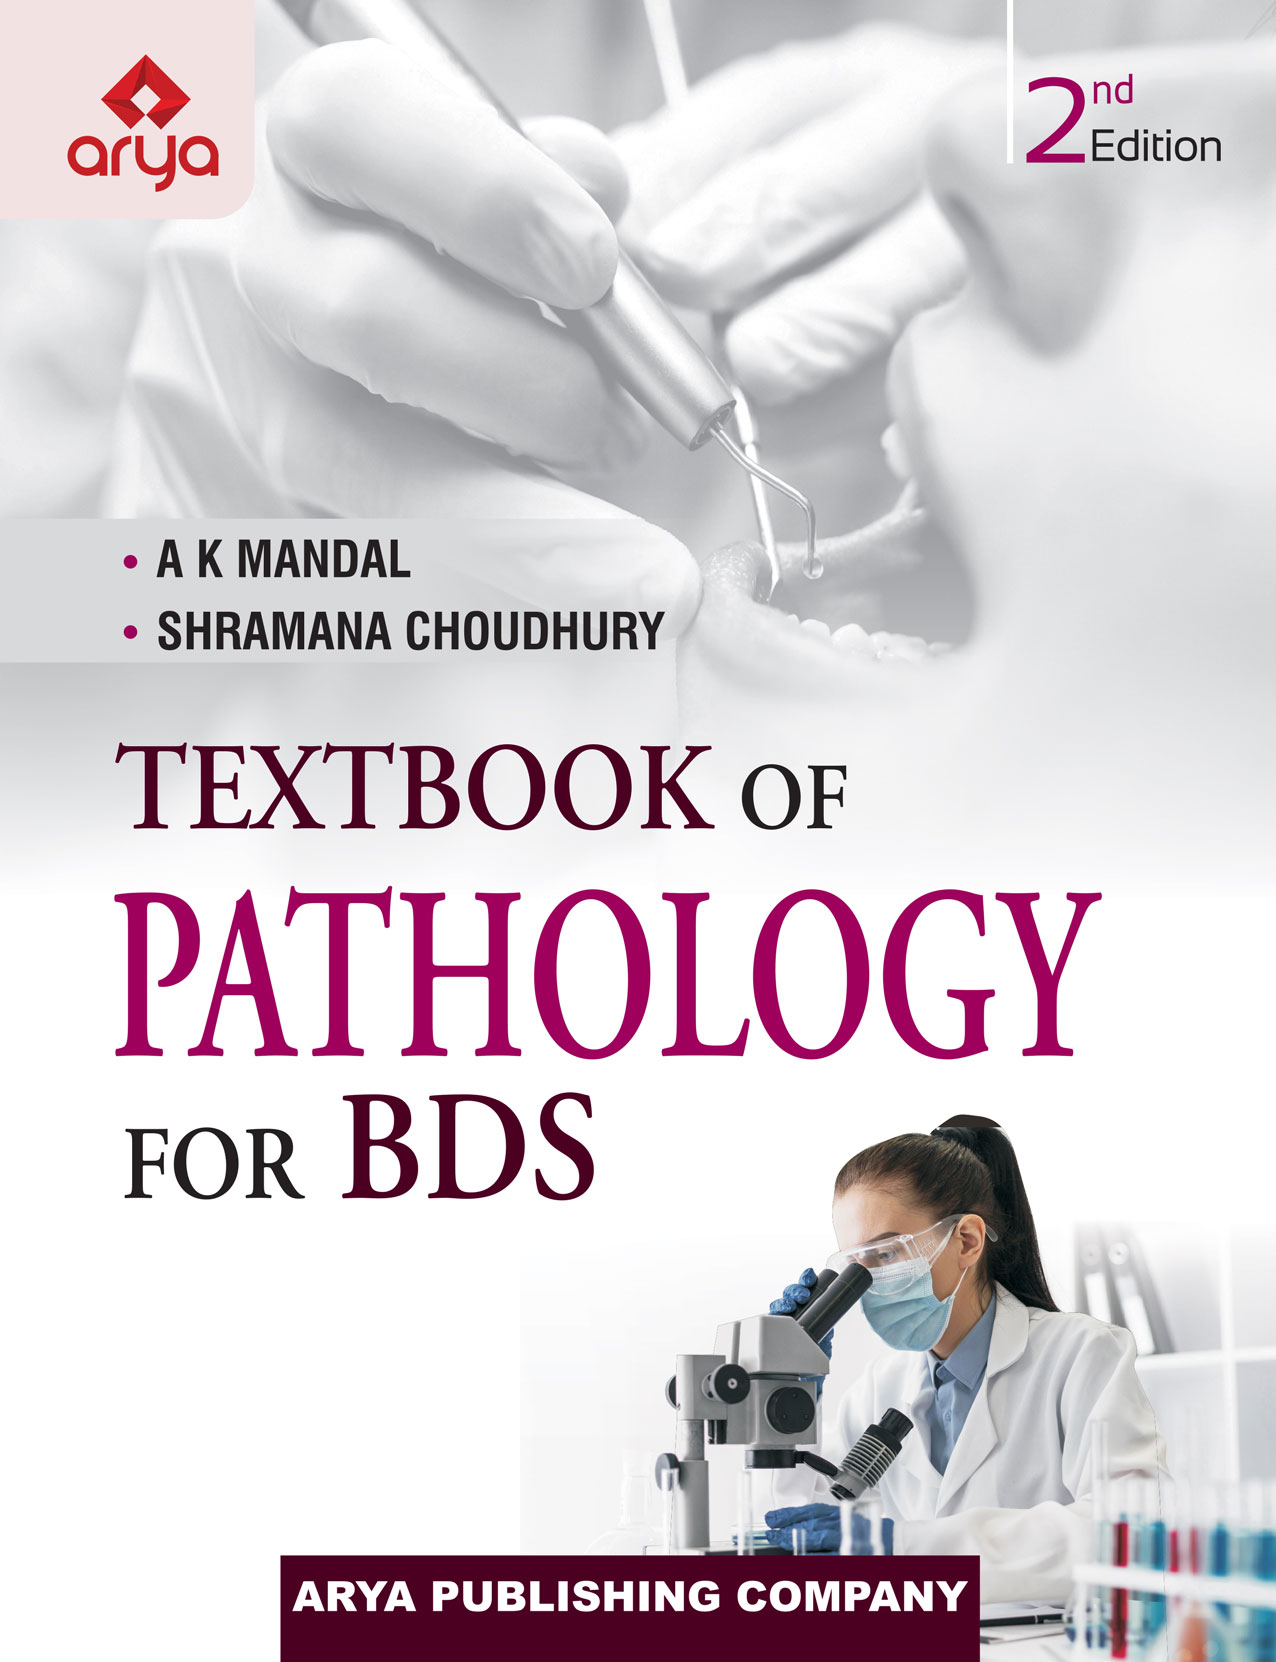 Textbook of Pathology for BDS